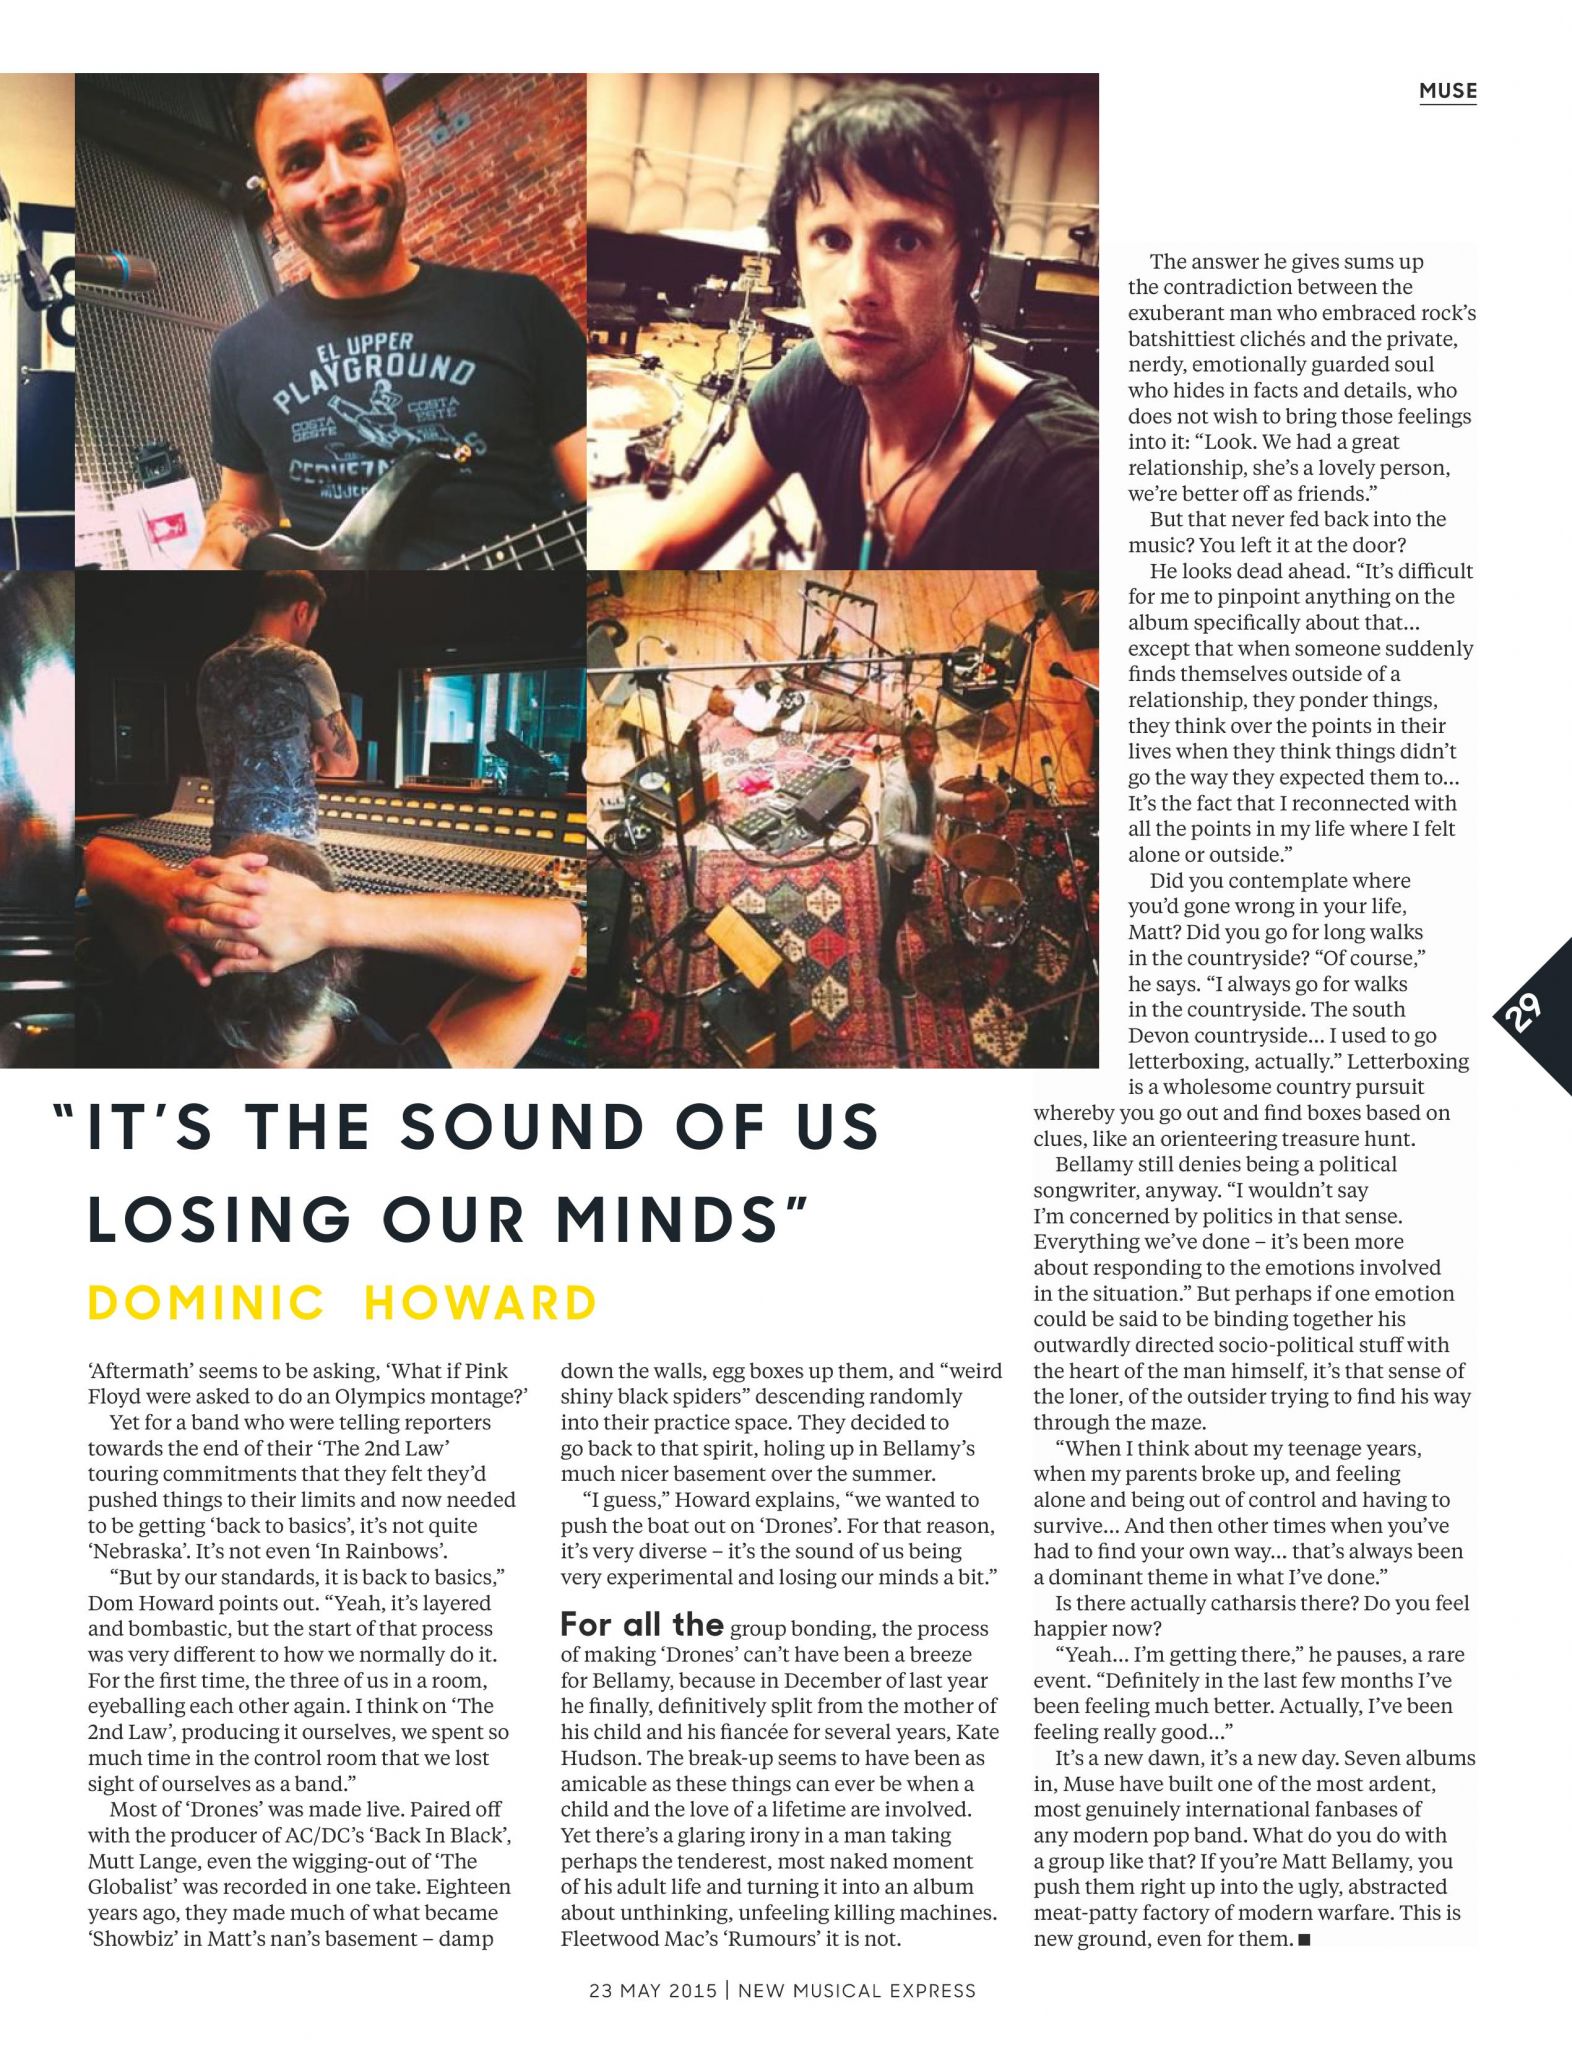 GAME OF DRONES NME Mai 2015